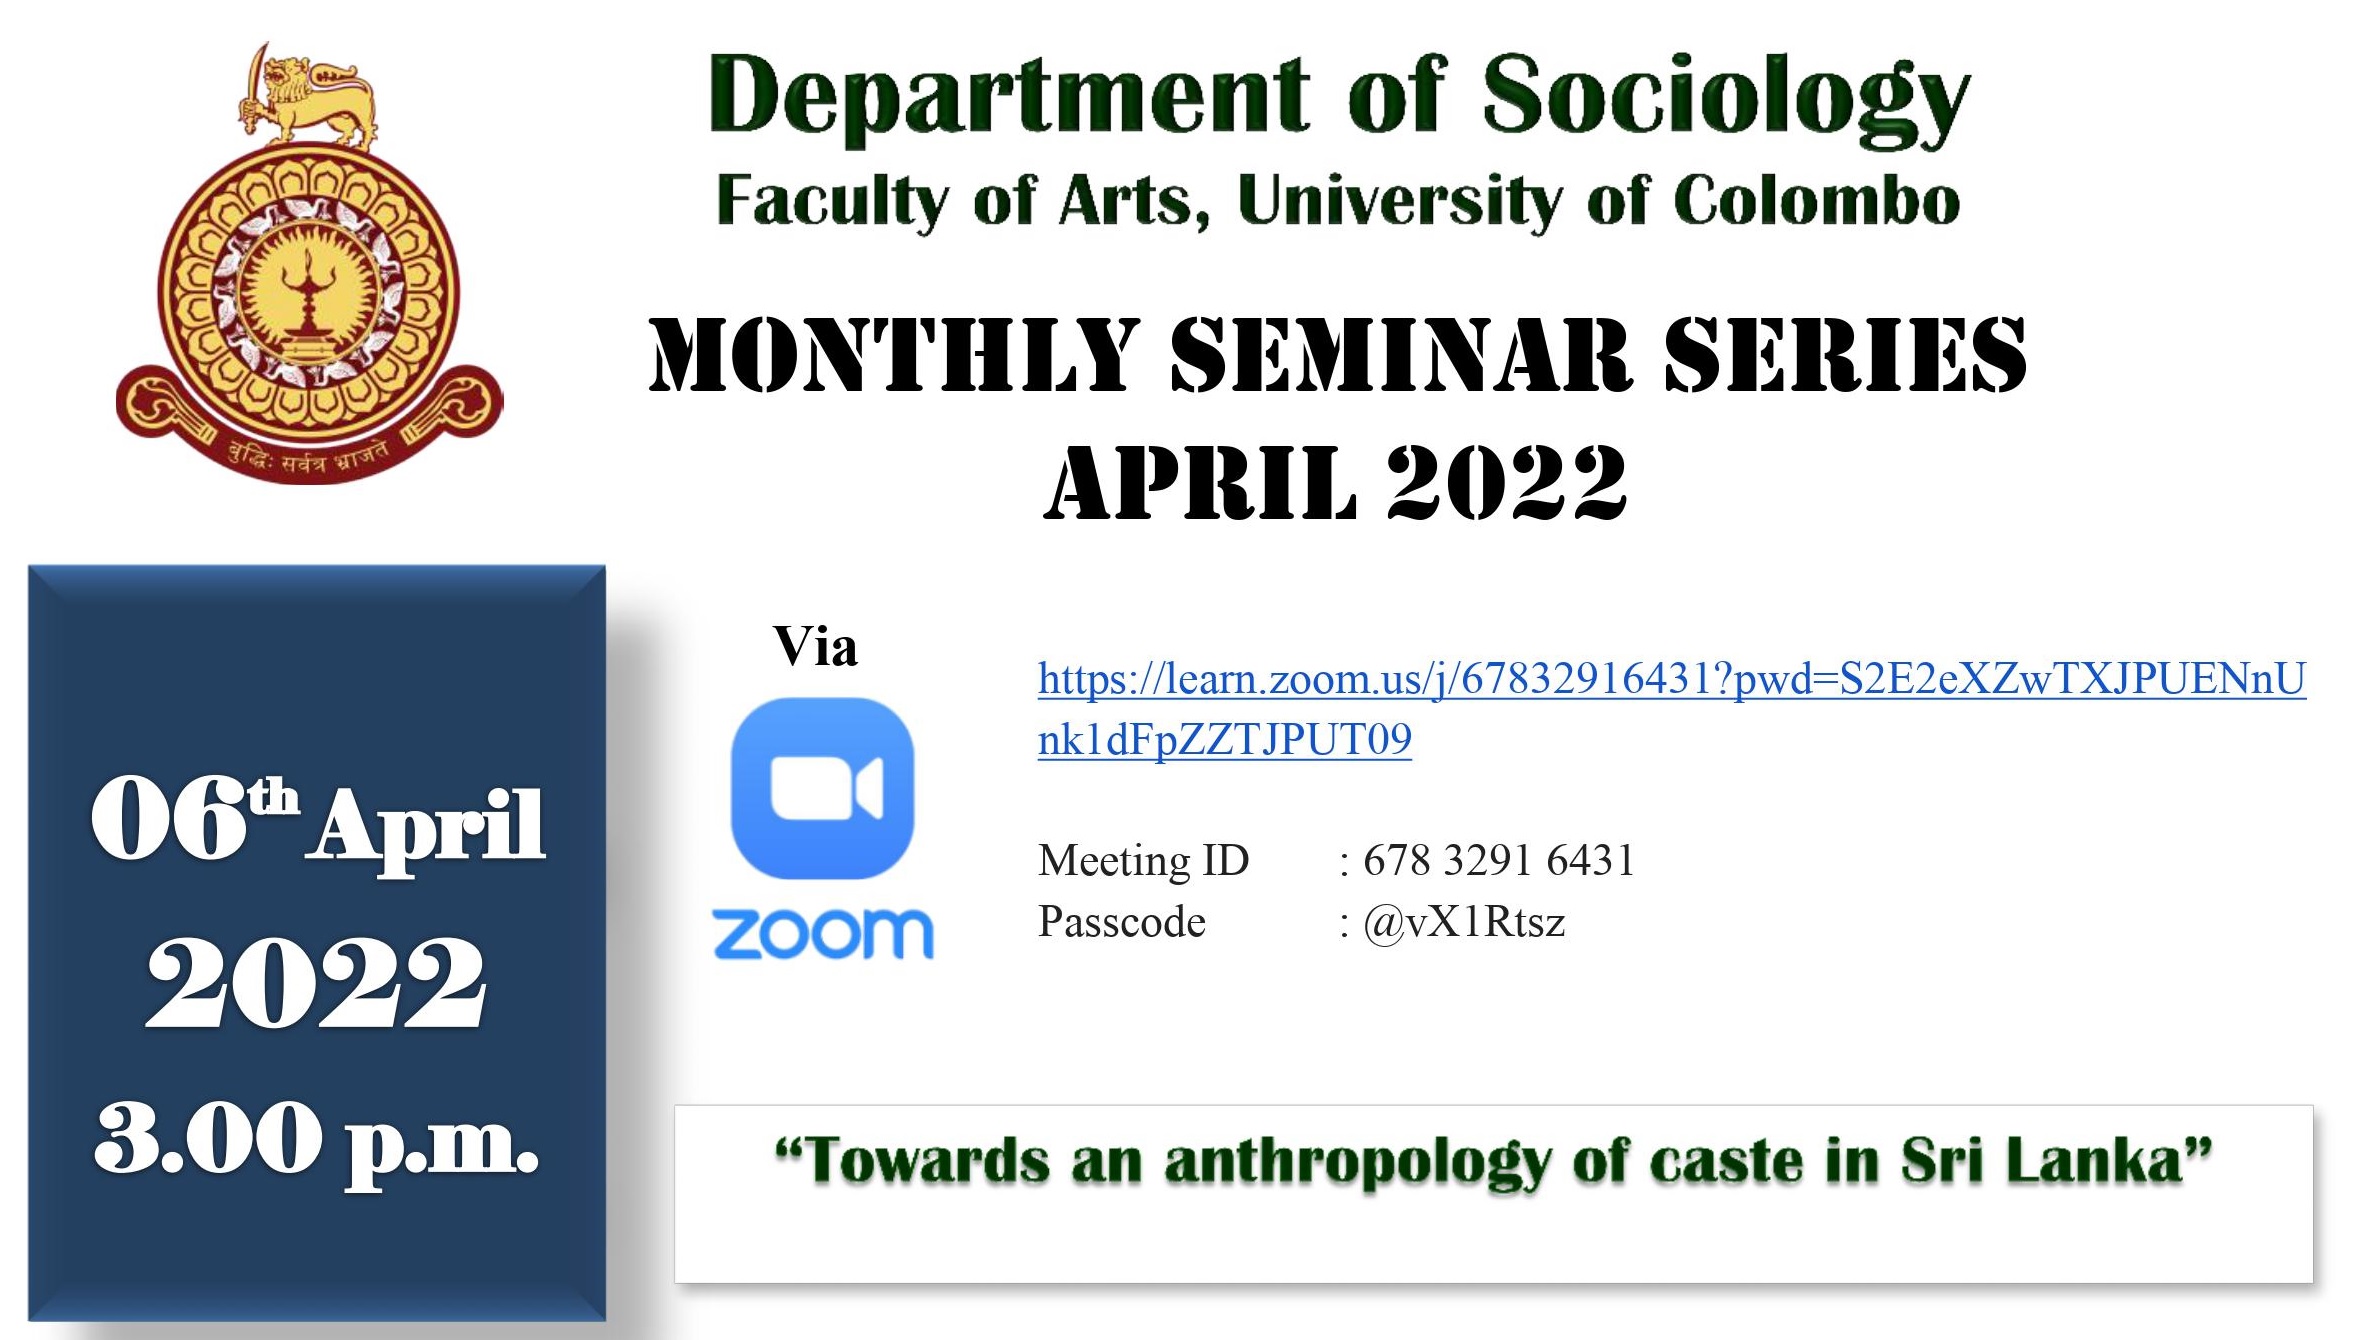 Department of Sociology Monthly Seminar Series  – 06th April